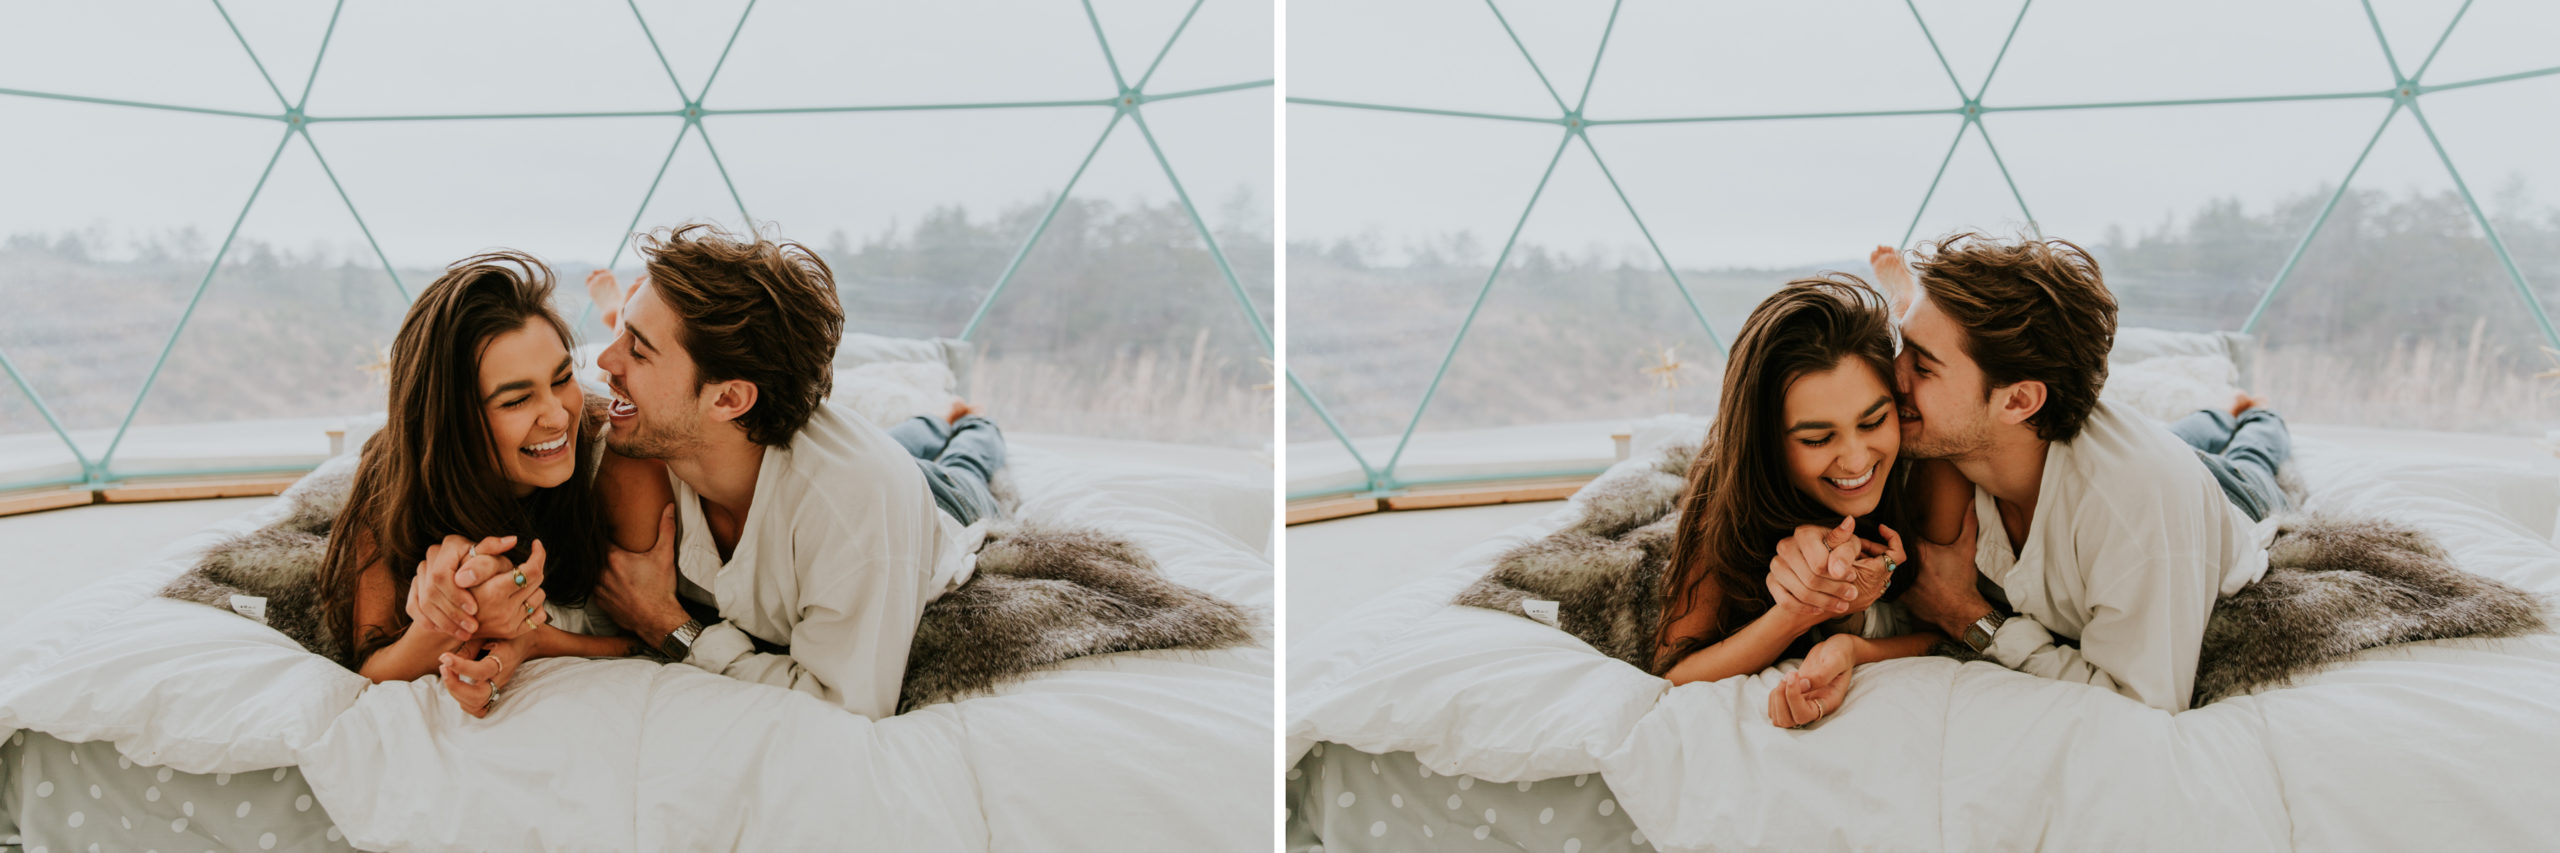 Asheville Glamping, Asheville Wedding Photographer, Glamping, In Home Session